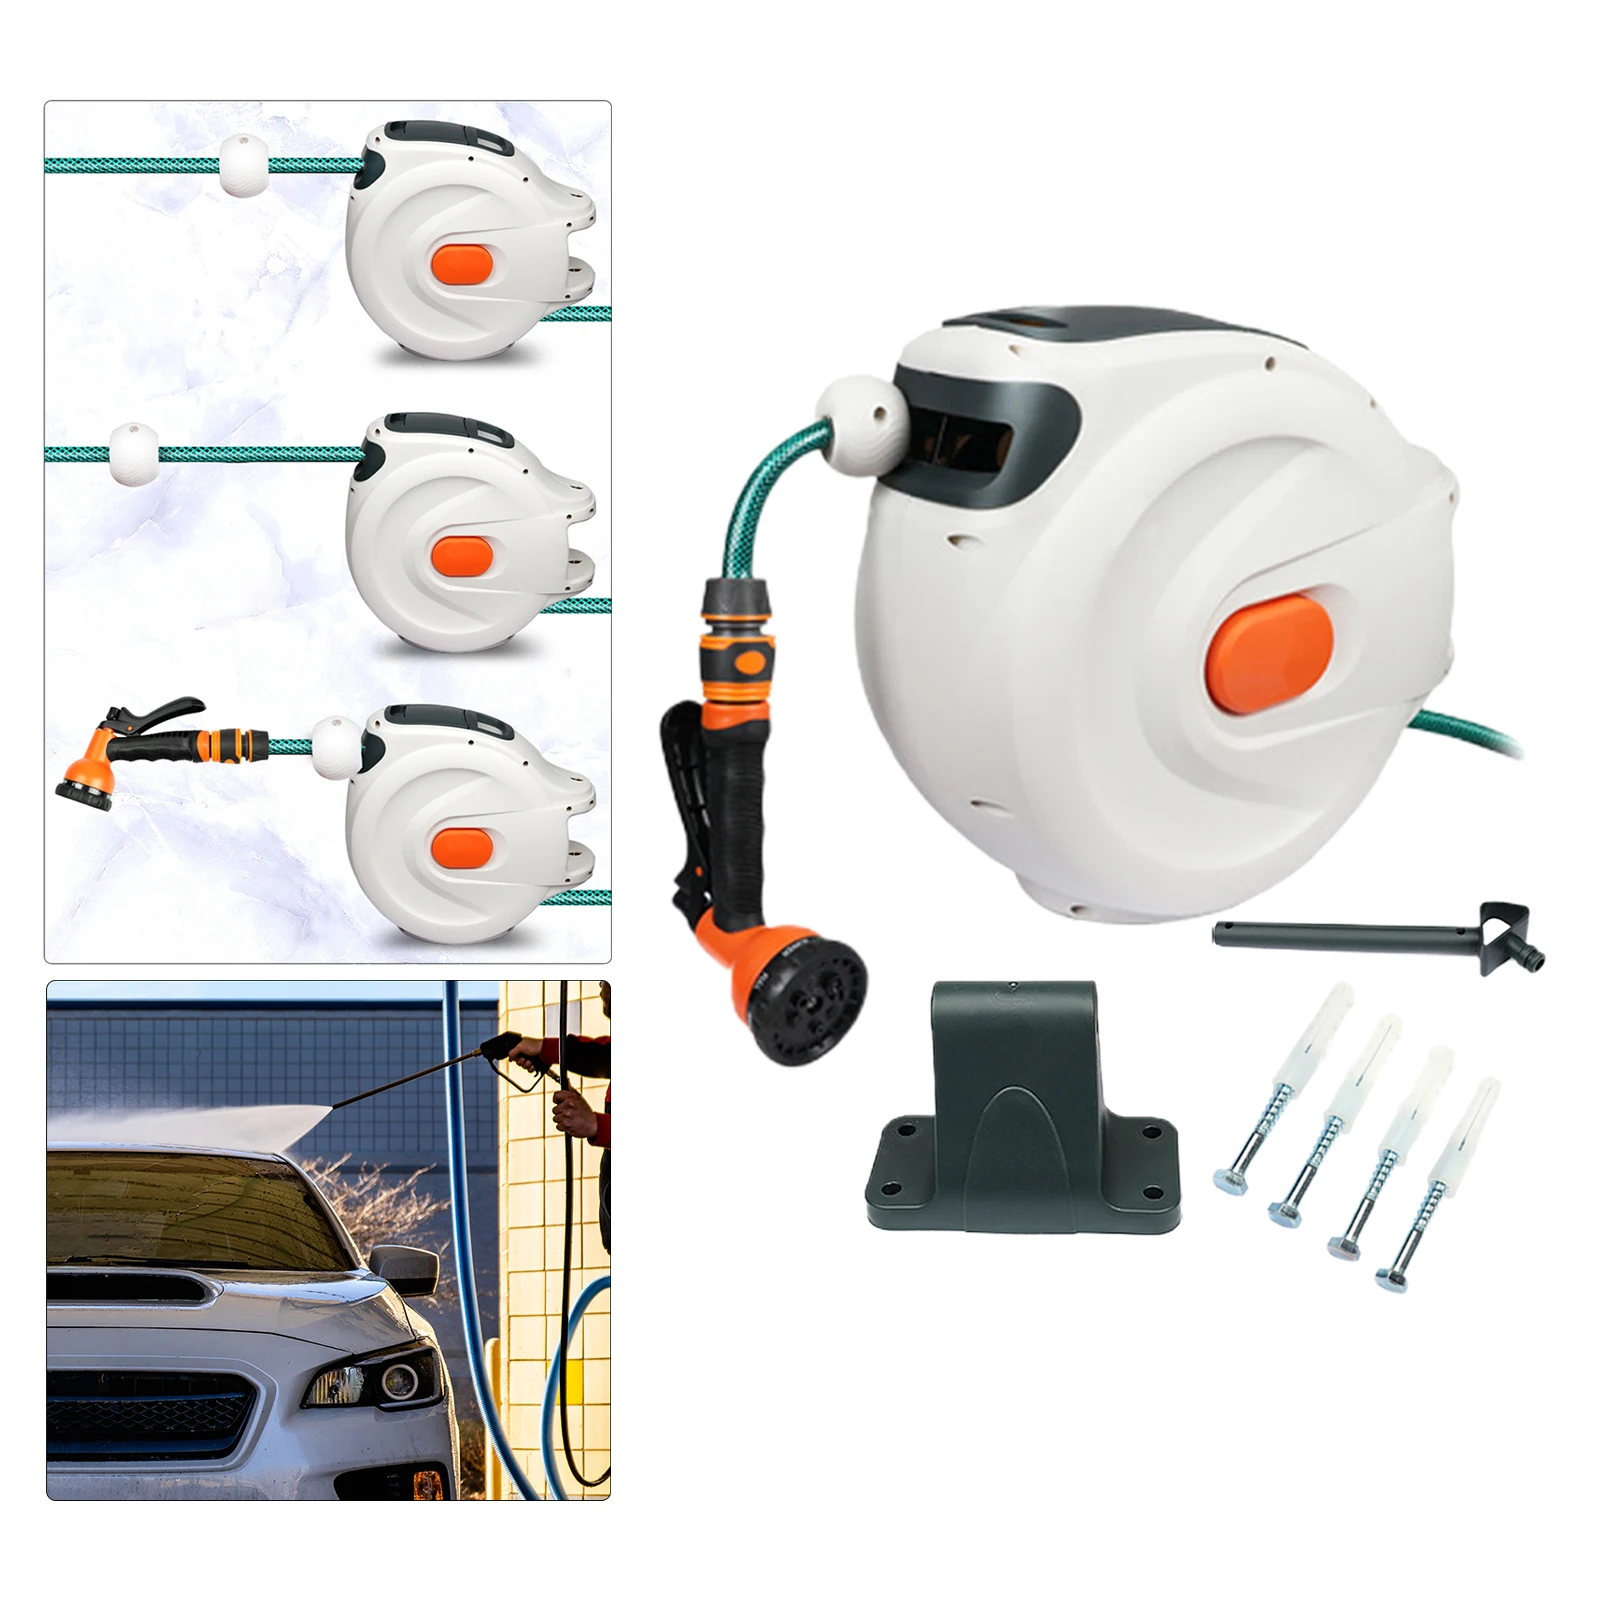 10/20m Automatic Rewind Hose Reel with 7 Pattern Hose Nozzle Water Hose Reel Slow Return System for Car Garden